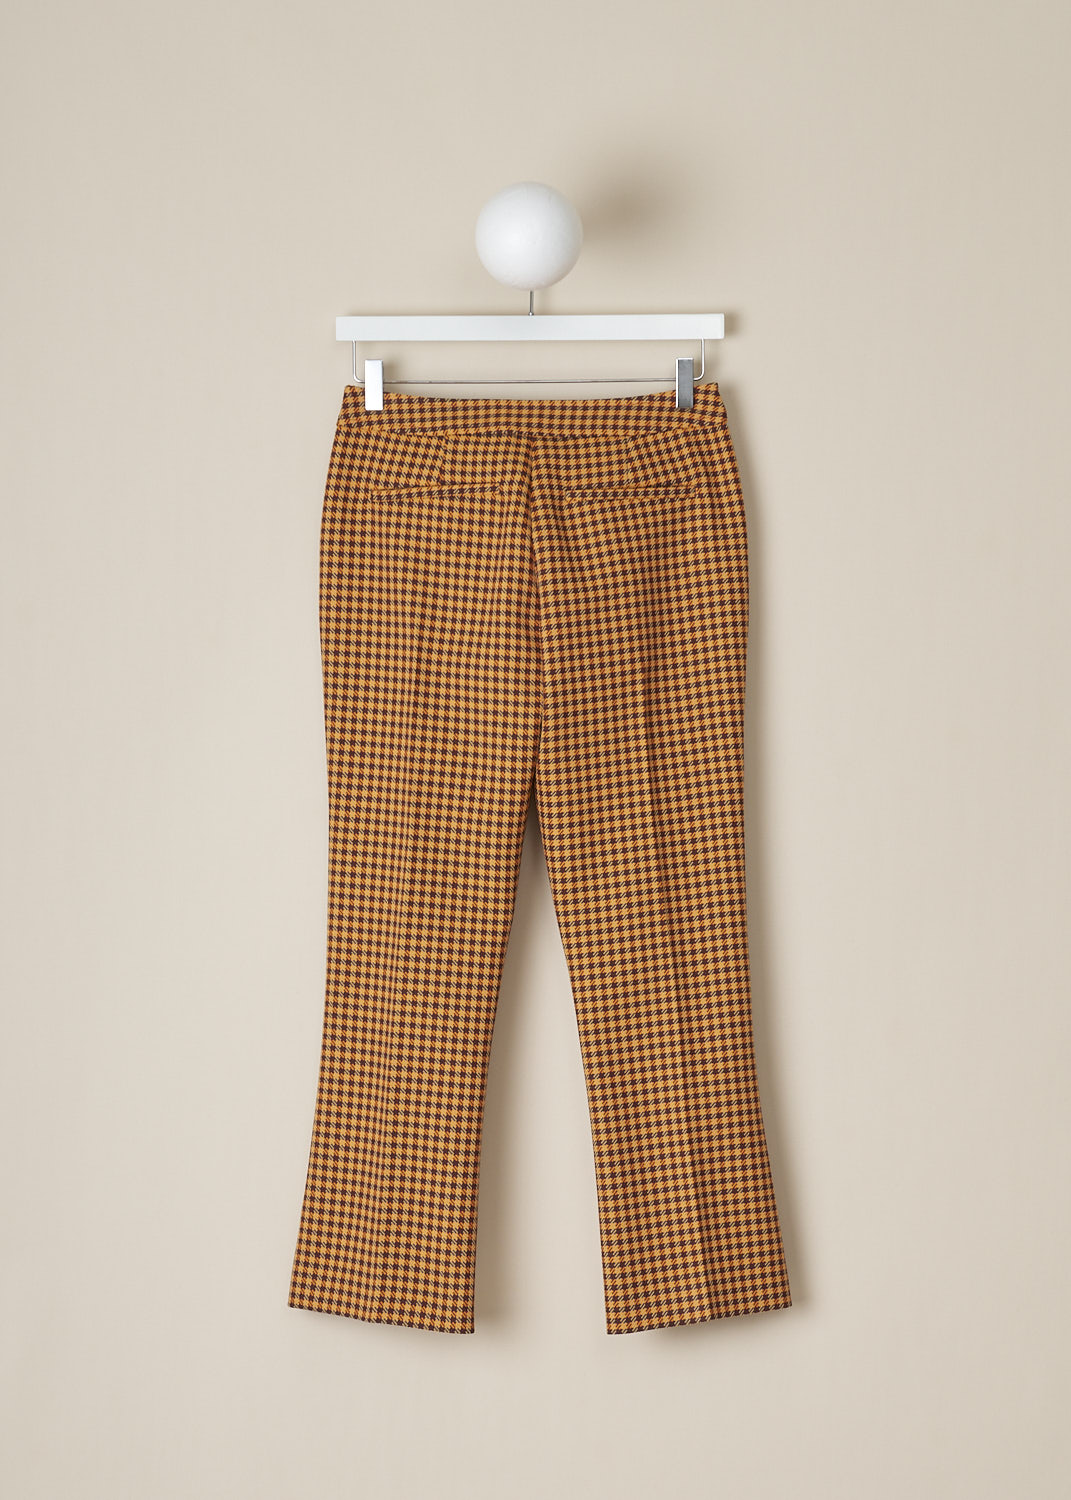 MARNI, ORANGE HOUNDSTOOTH PANTS, PAMA0341IM_UTP730_CHR79, Orange, Print, Back, These mid-rise orange Houndstooth pants has a narrow waistband and a concealed clasp and zip closure. These pants have slanted pockets in the front and welt pockets in the back. Black piping runs along the side seams and centre creases run along the length of the pant legs. 
